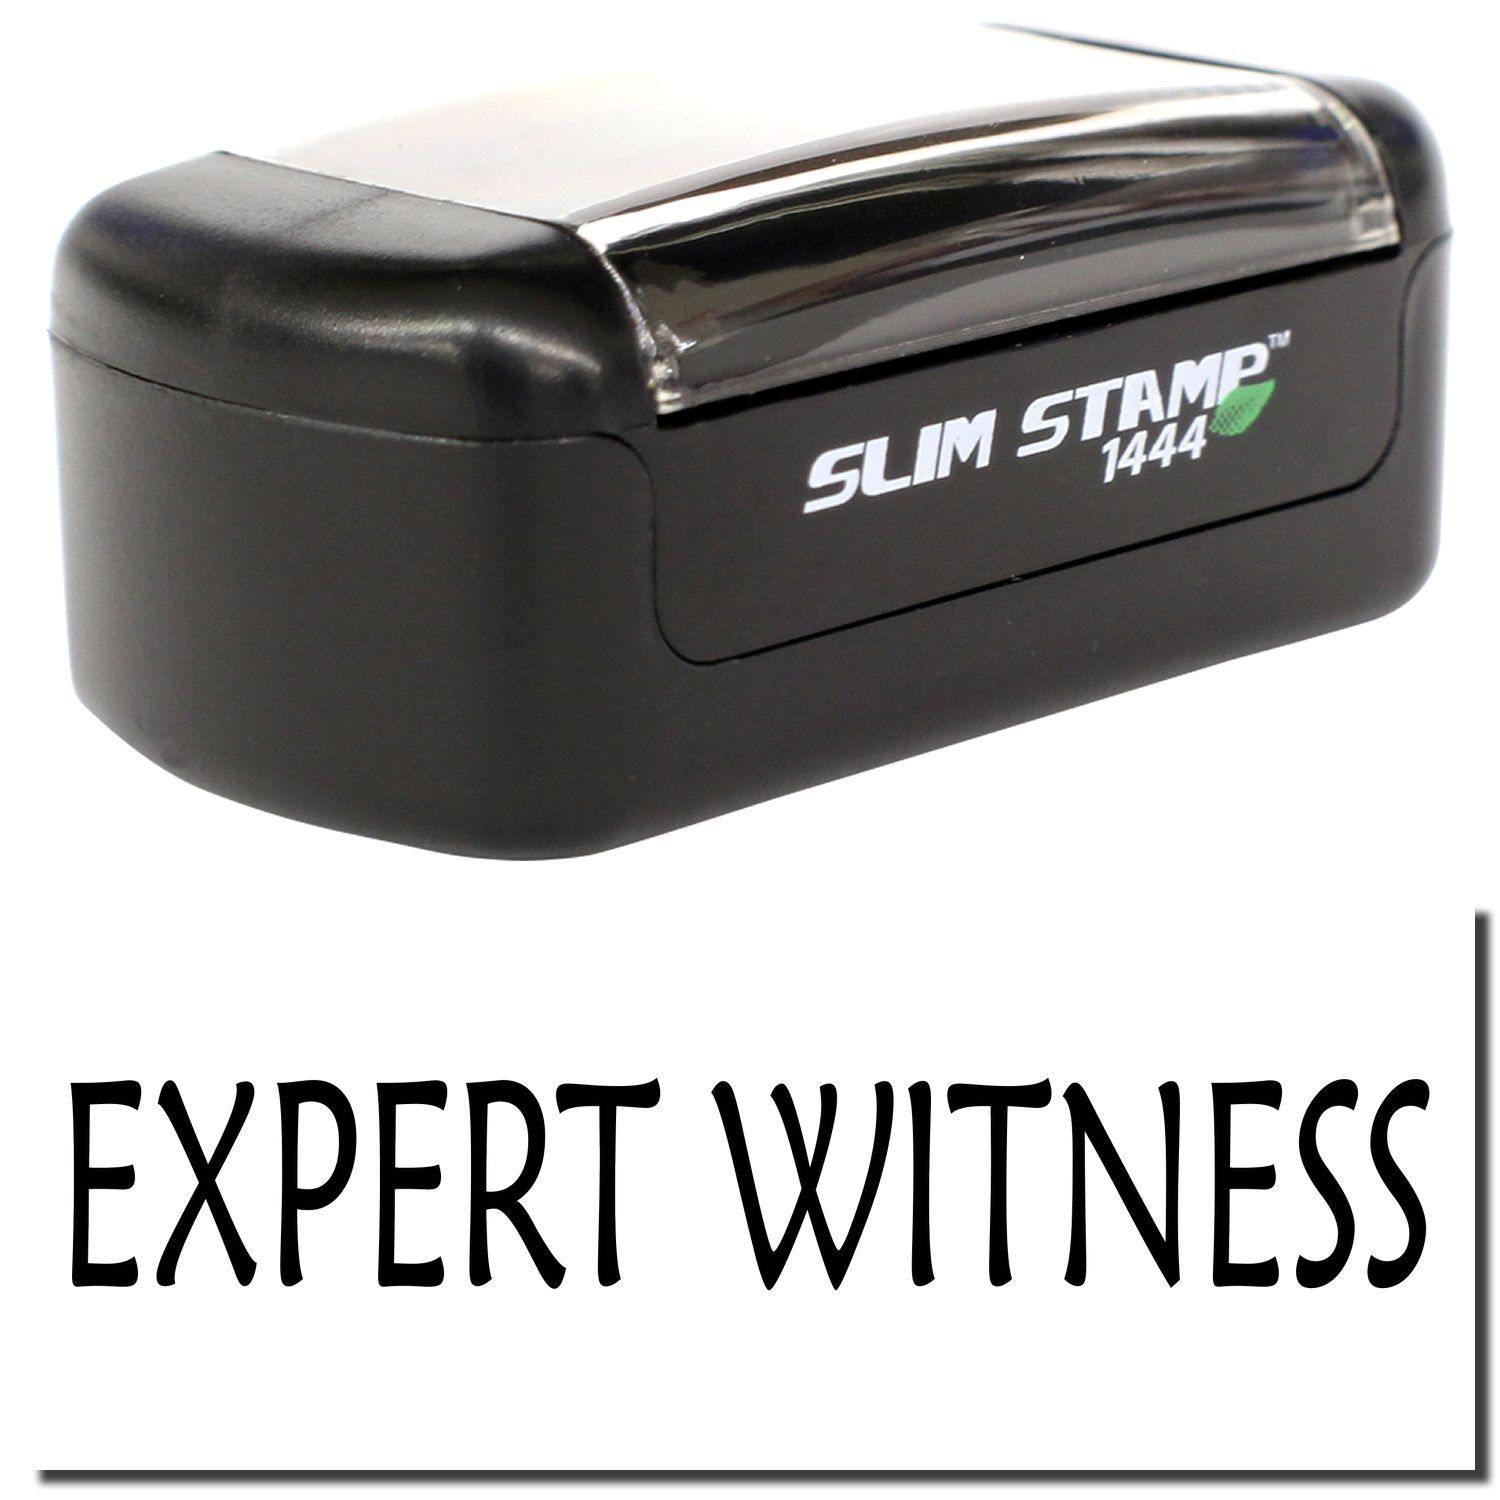 A stock office pre-inked stamp with a stamped image showing how the text "EXPERT WITNESS" is displayed after stamping.